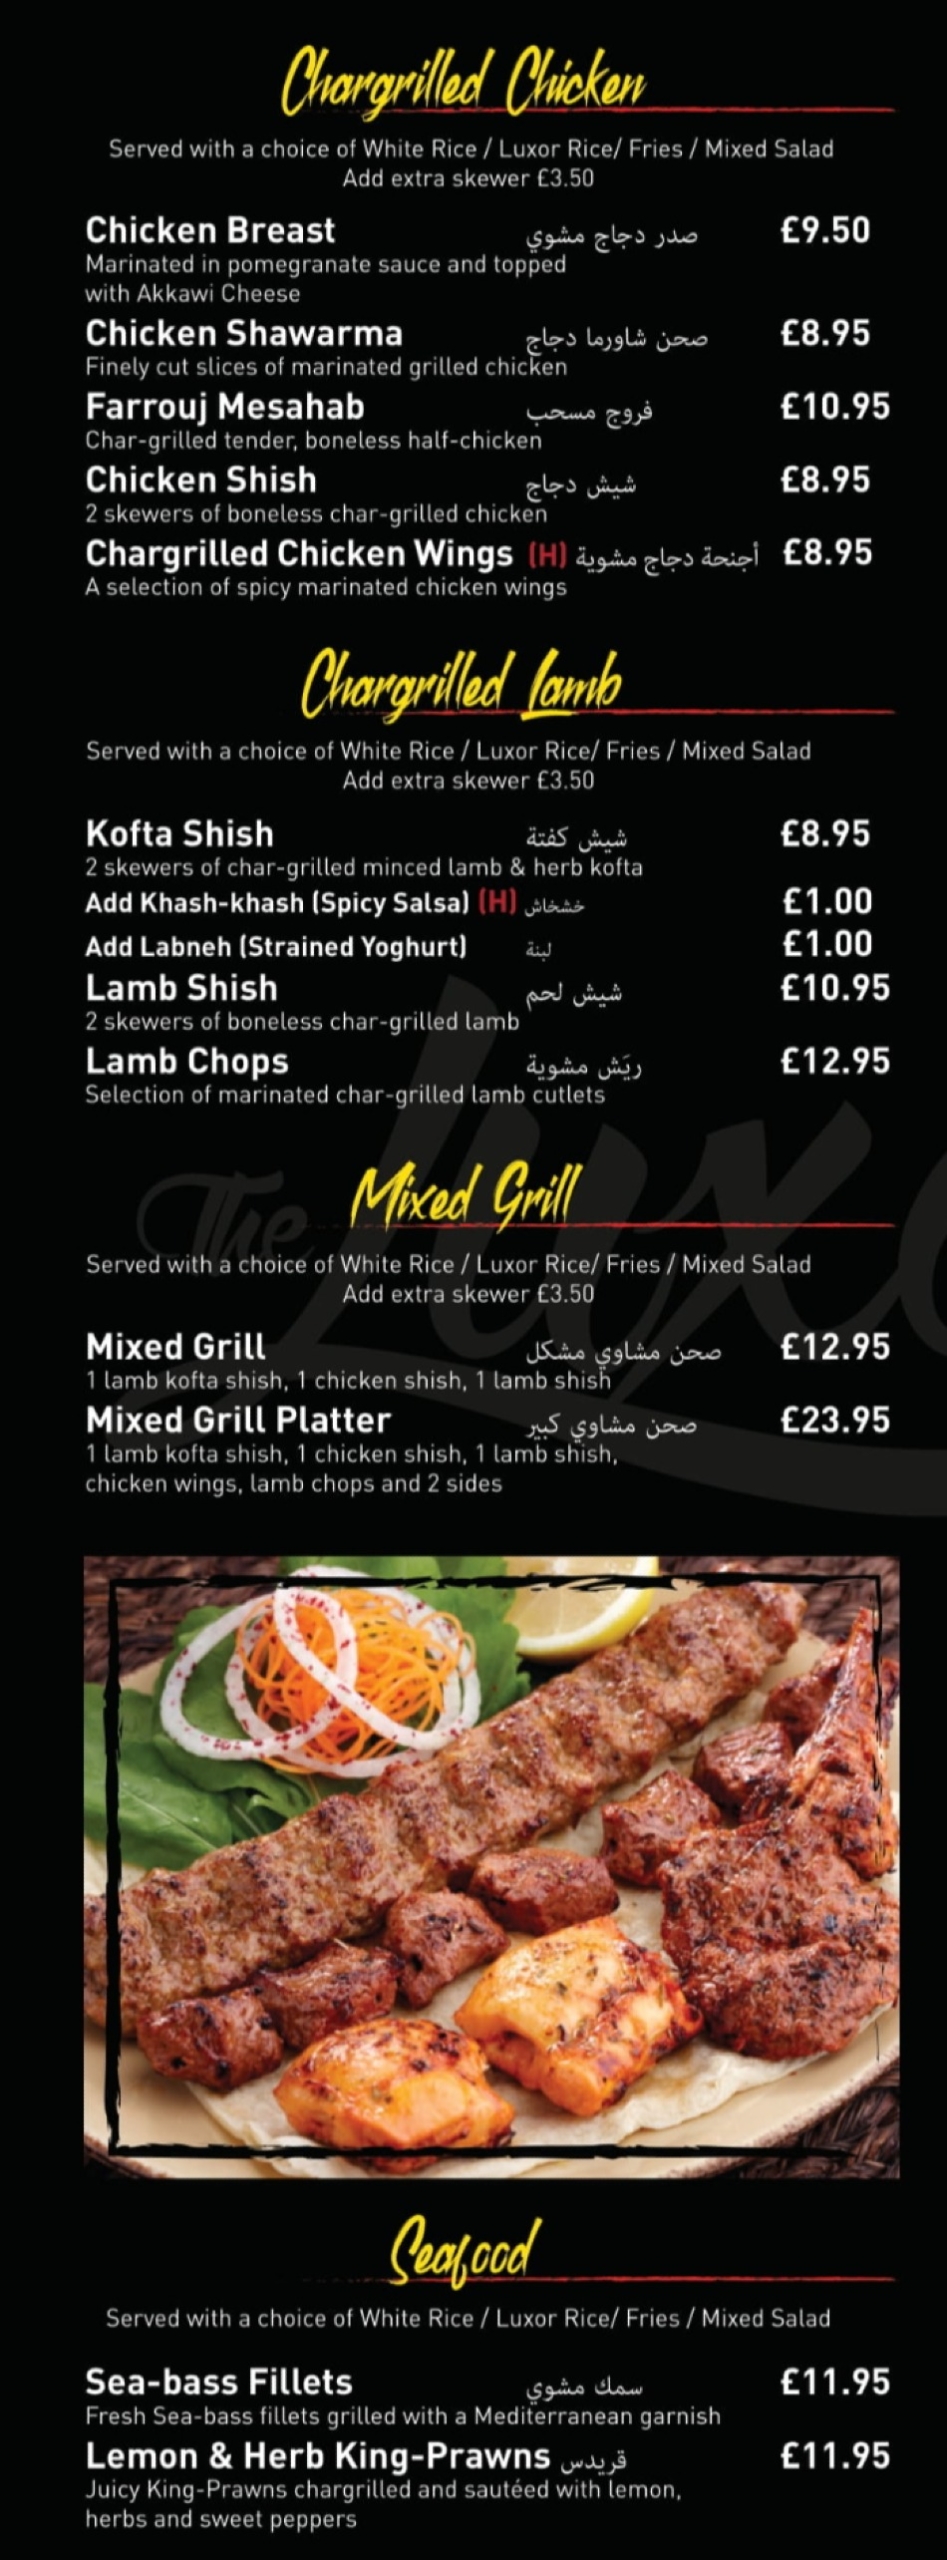 Takeaway Restaurant Menu Page - The Luxor - Bournemouth